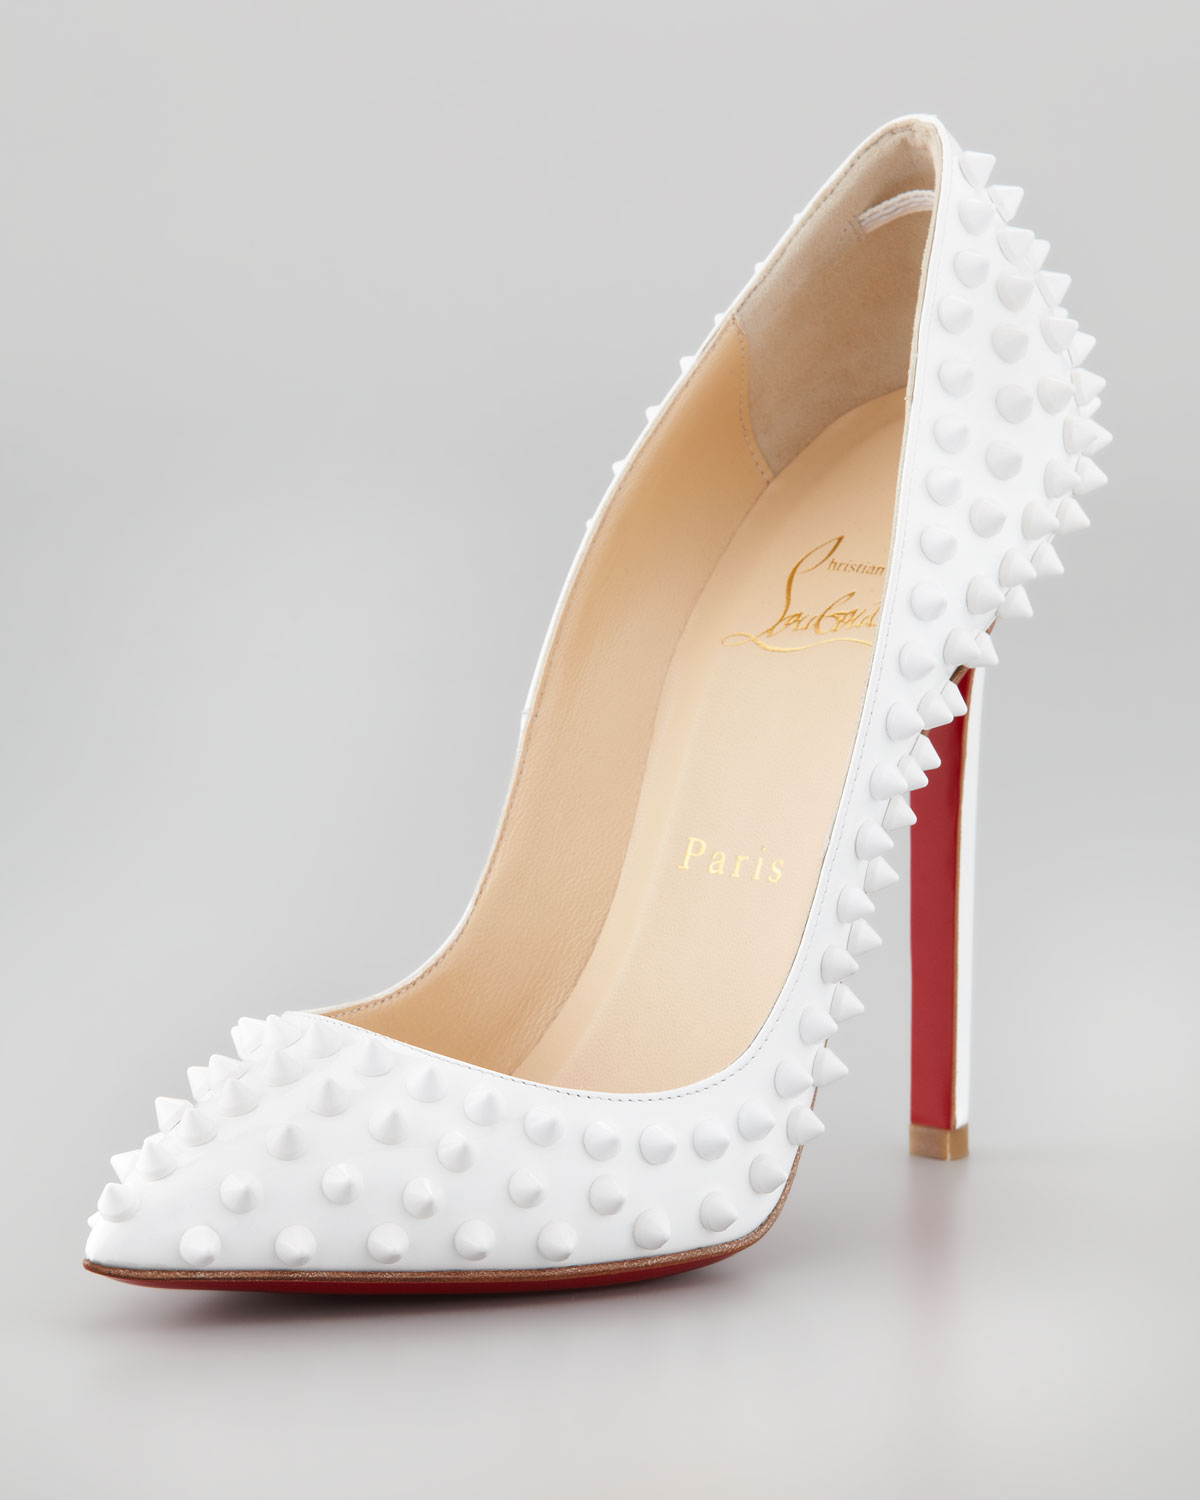 Christian Louboutin Pigalle Spiked Patent Red Sole Pump Chalk in White - Lyst